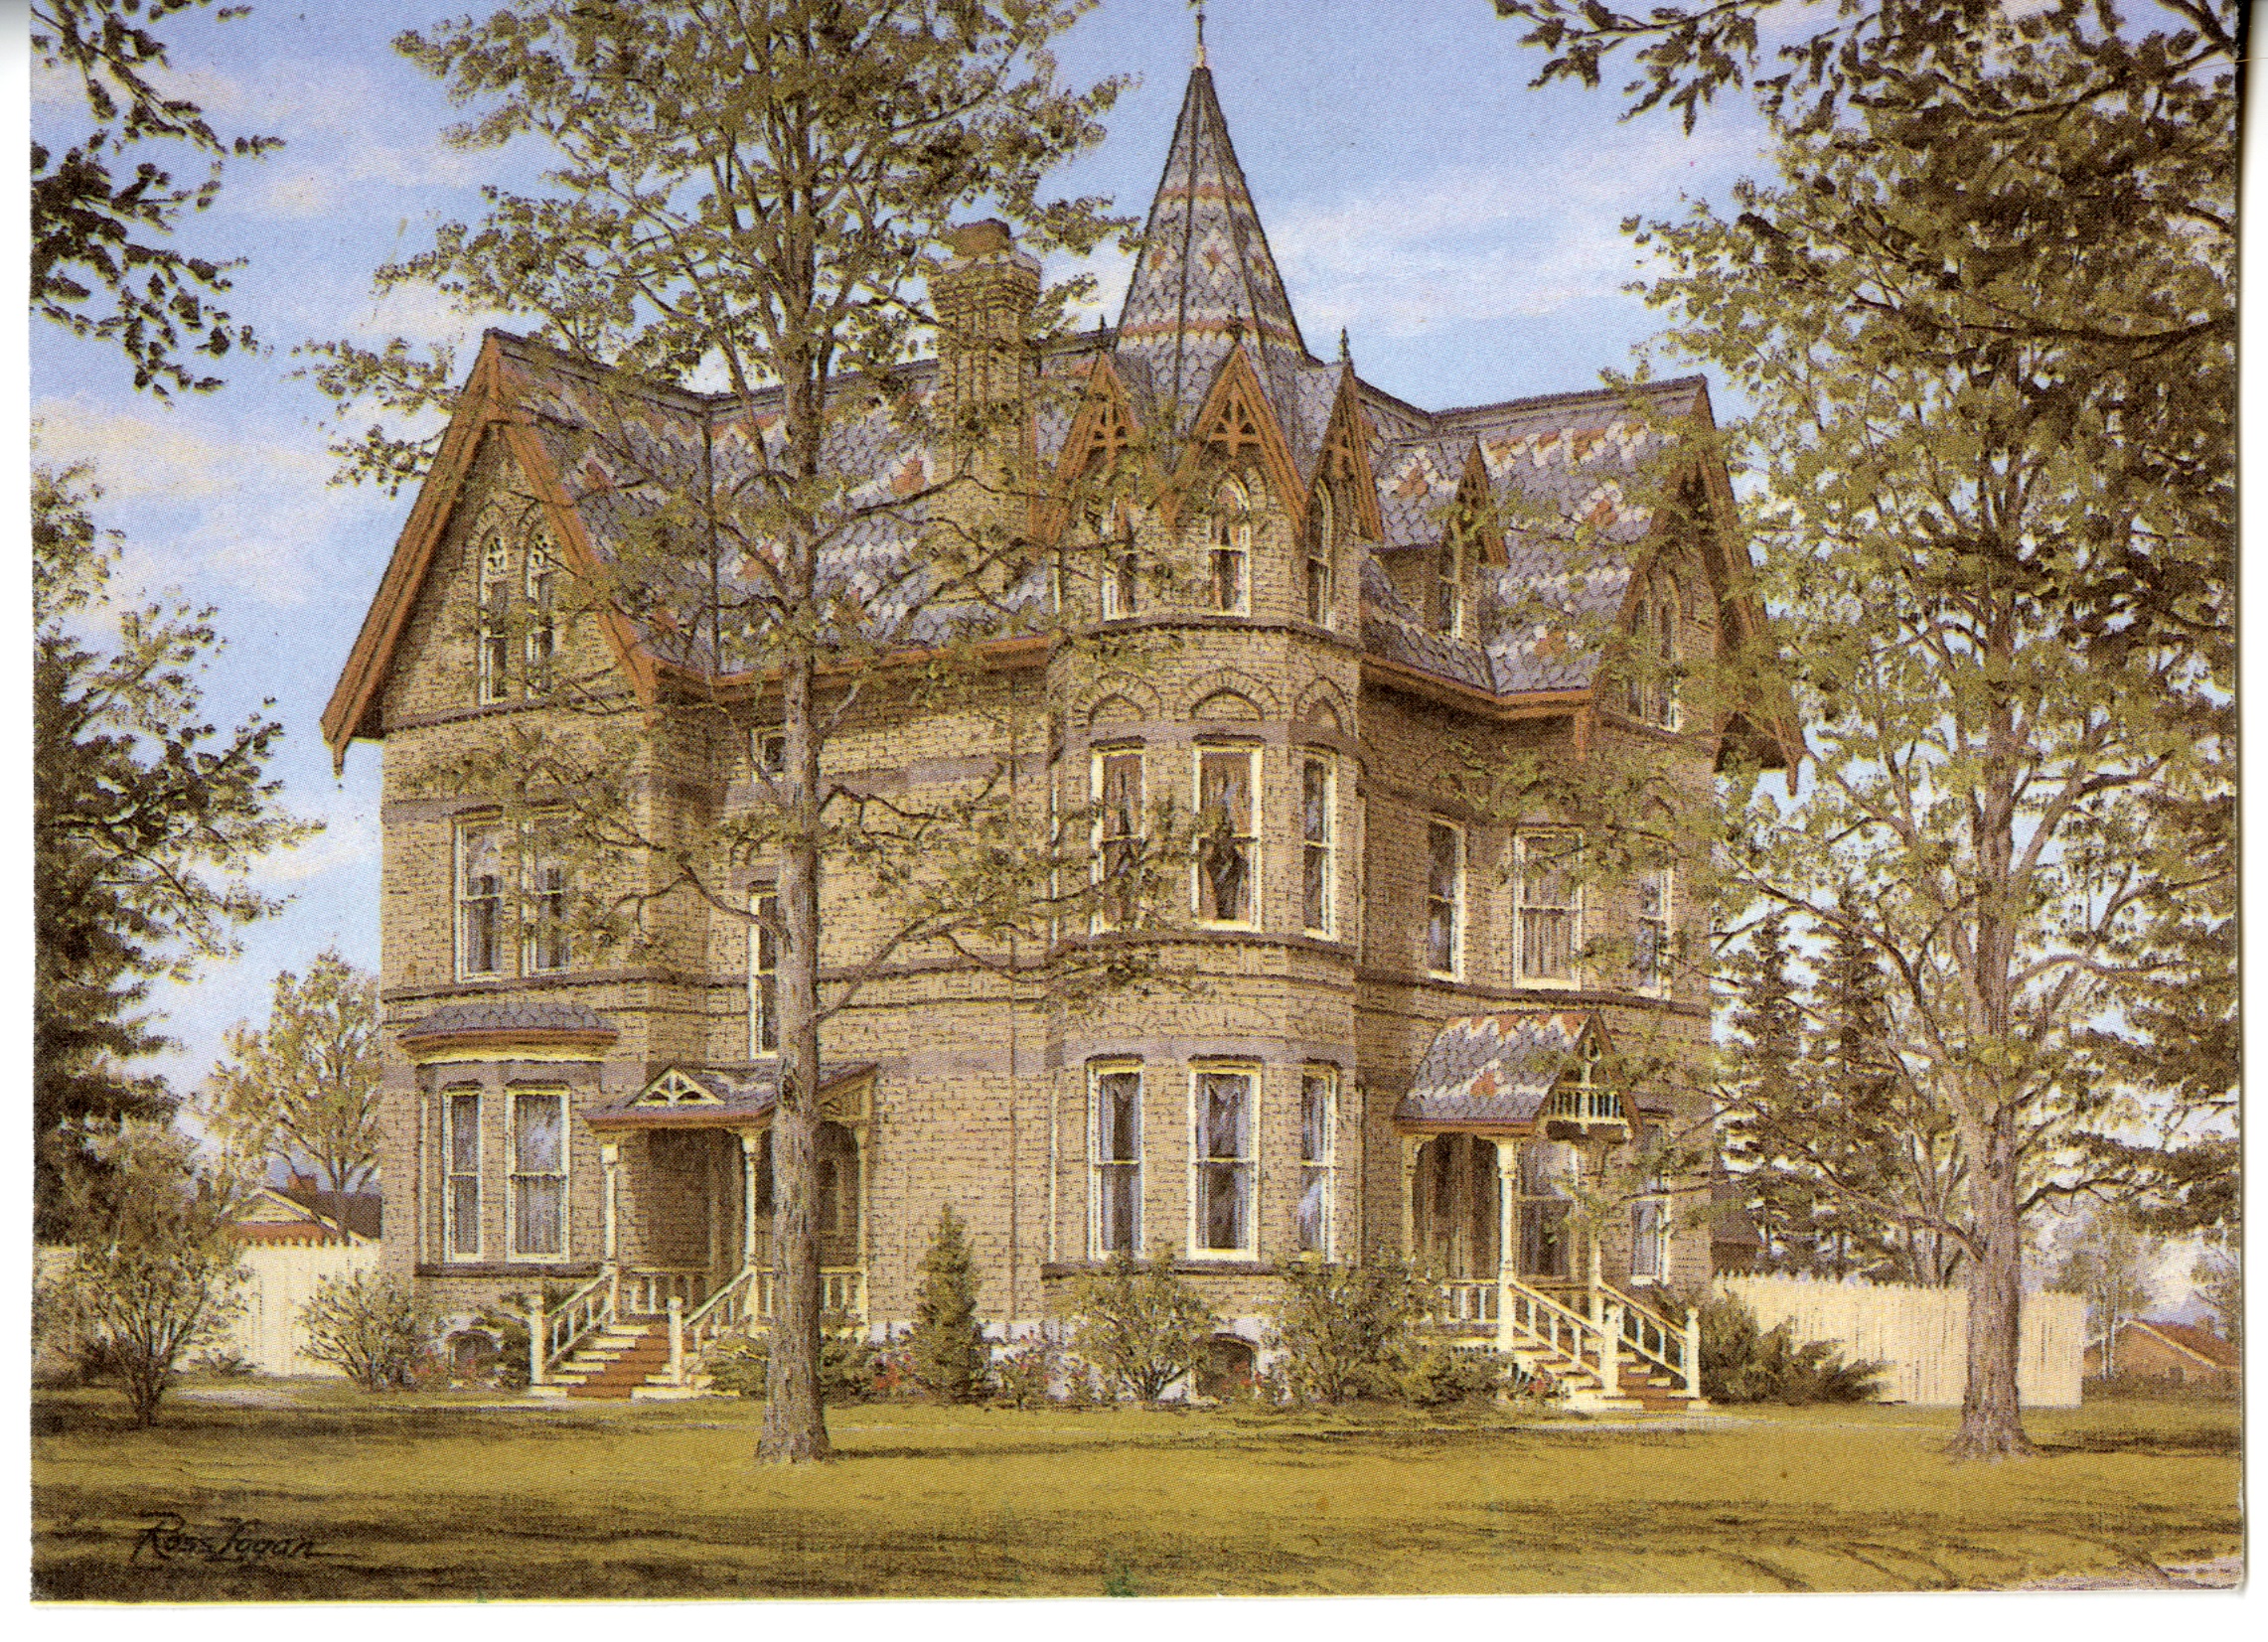 A postcard of Annandale House. The house partially obscured by trees, sky is blue with a few white clouds. It is a large, three-storey, yellow brick house with a tower on the one corner. The roof is shingled with gray, white, and red shingles a zig-zagging pattern. It is a very elaborate and grand home.